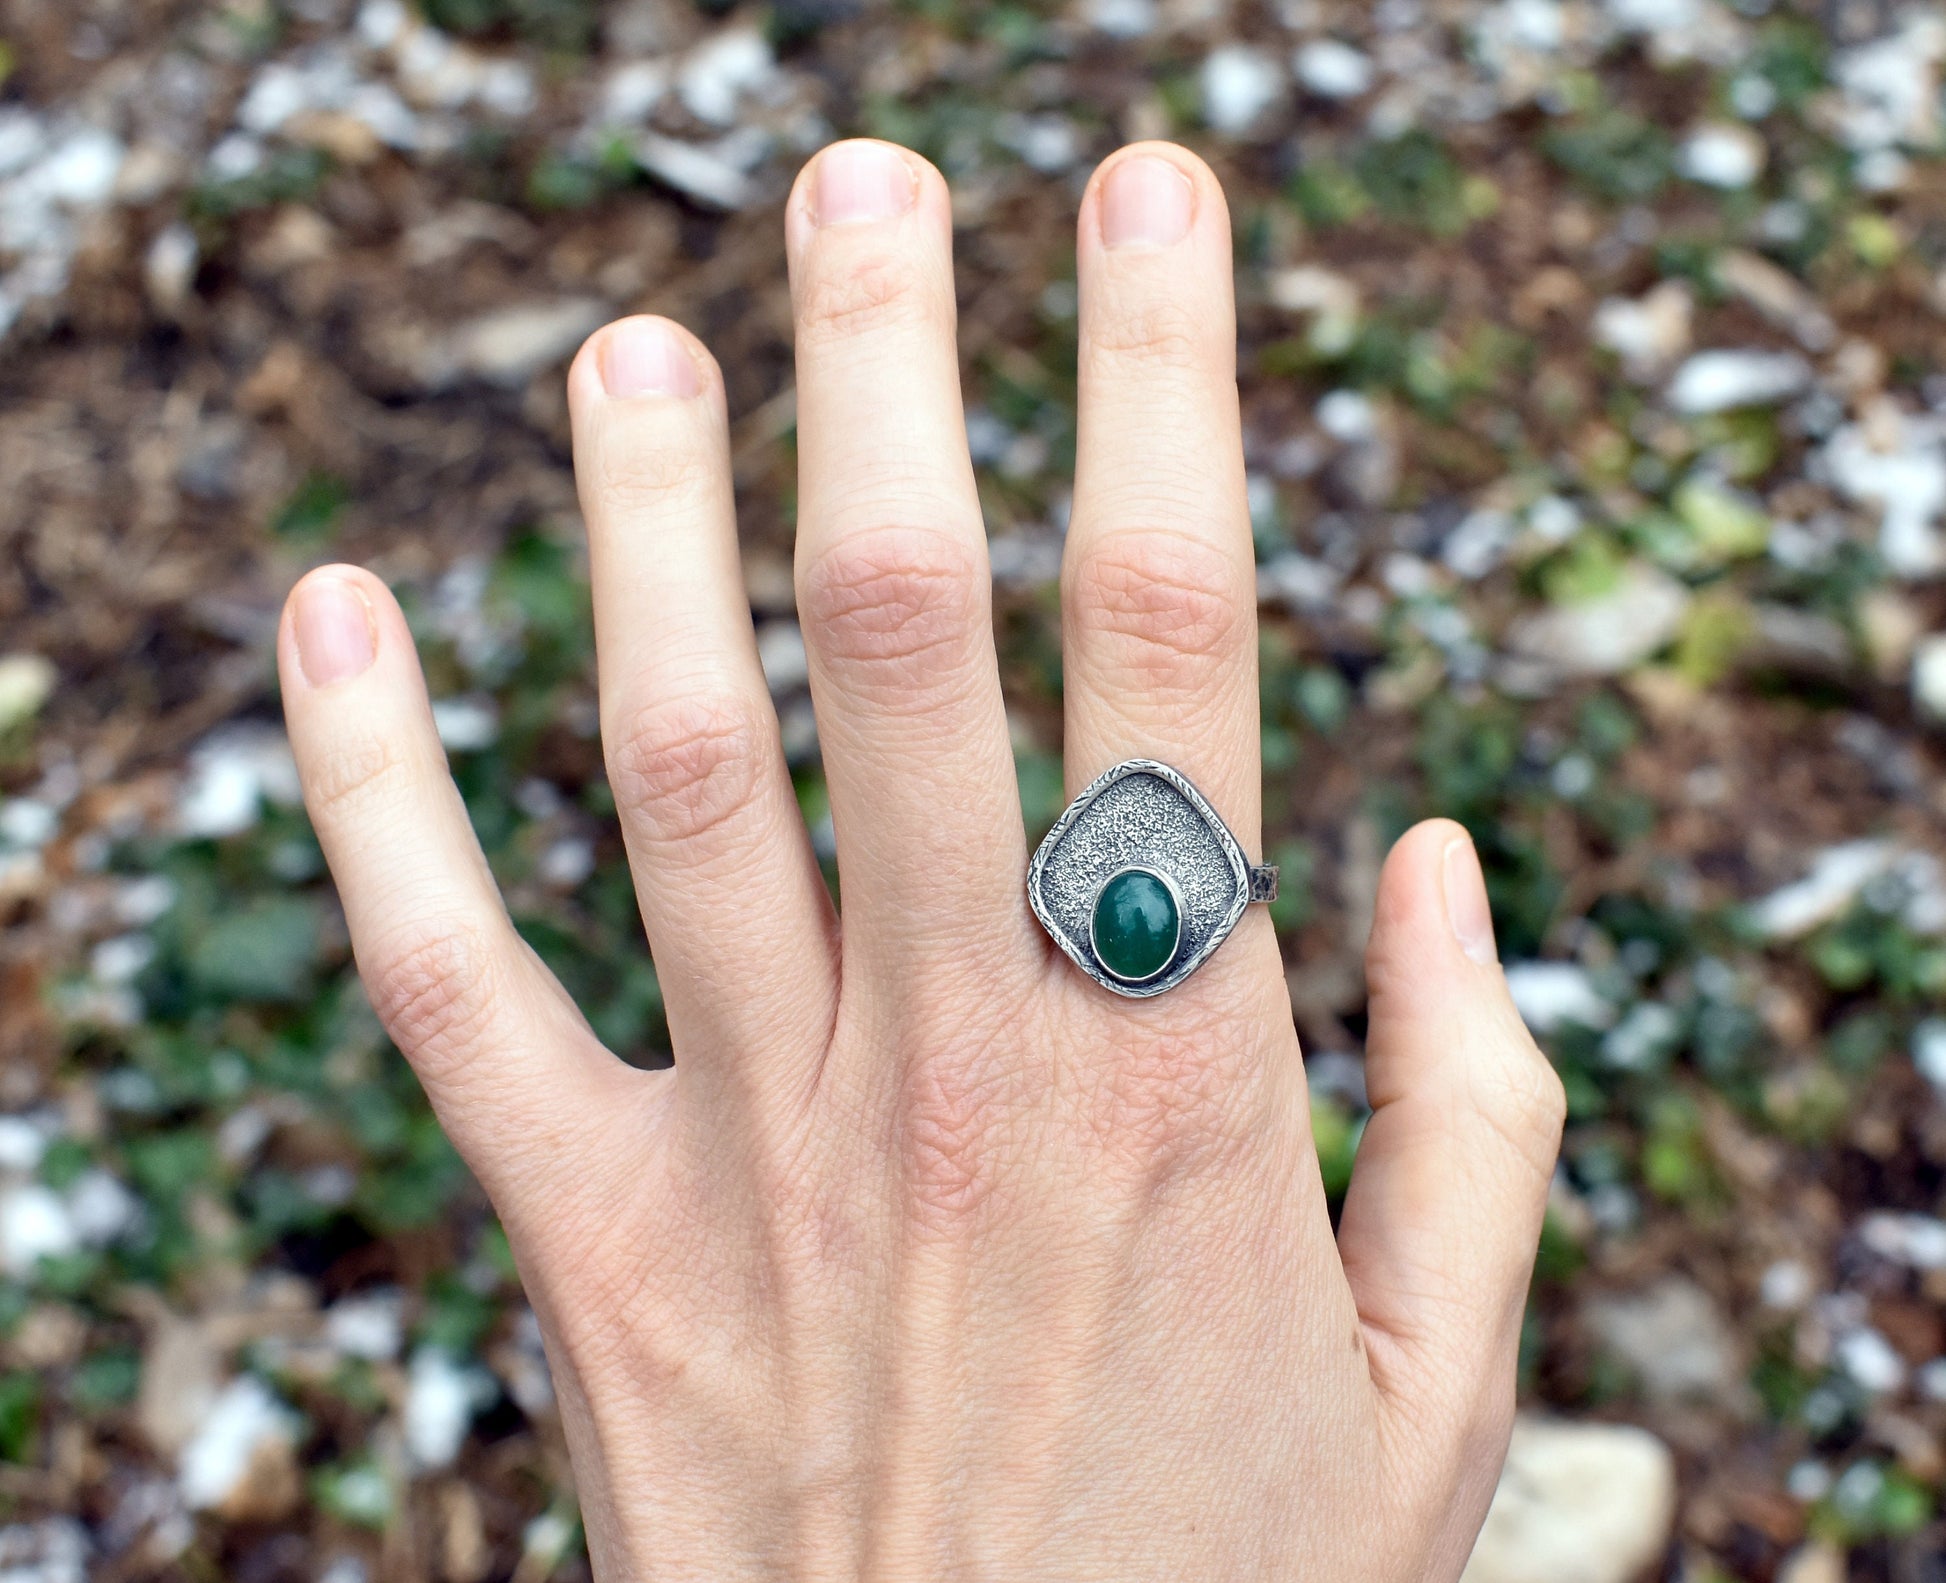 Green Onyx Sterling Silver Ring, Size 10, Rustic Silversmith Jewelry, Artisan Handmade, Unique Gemstone